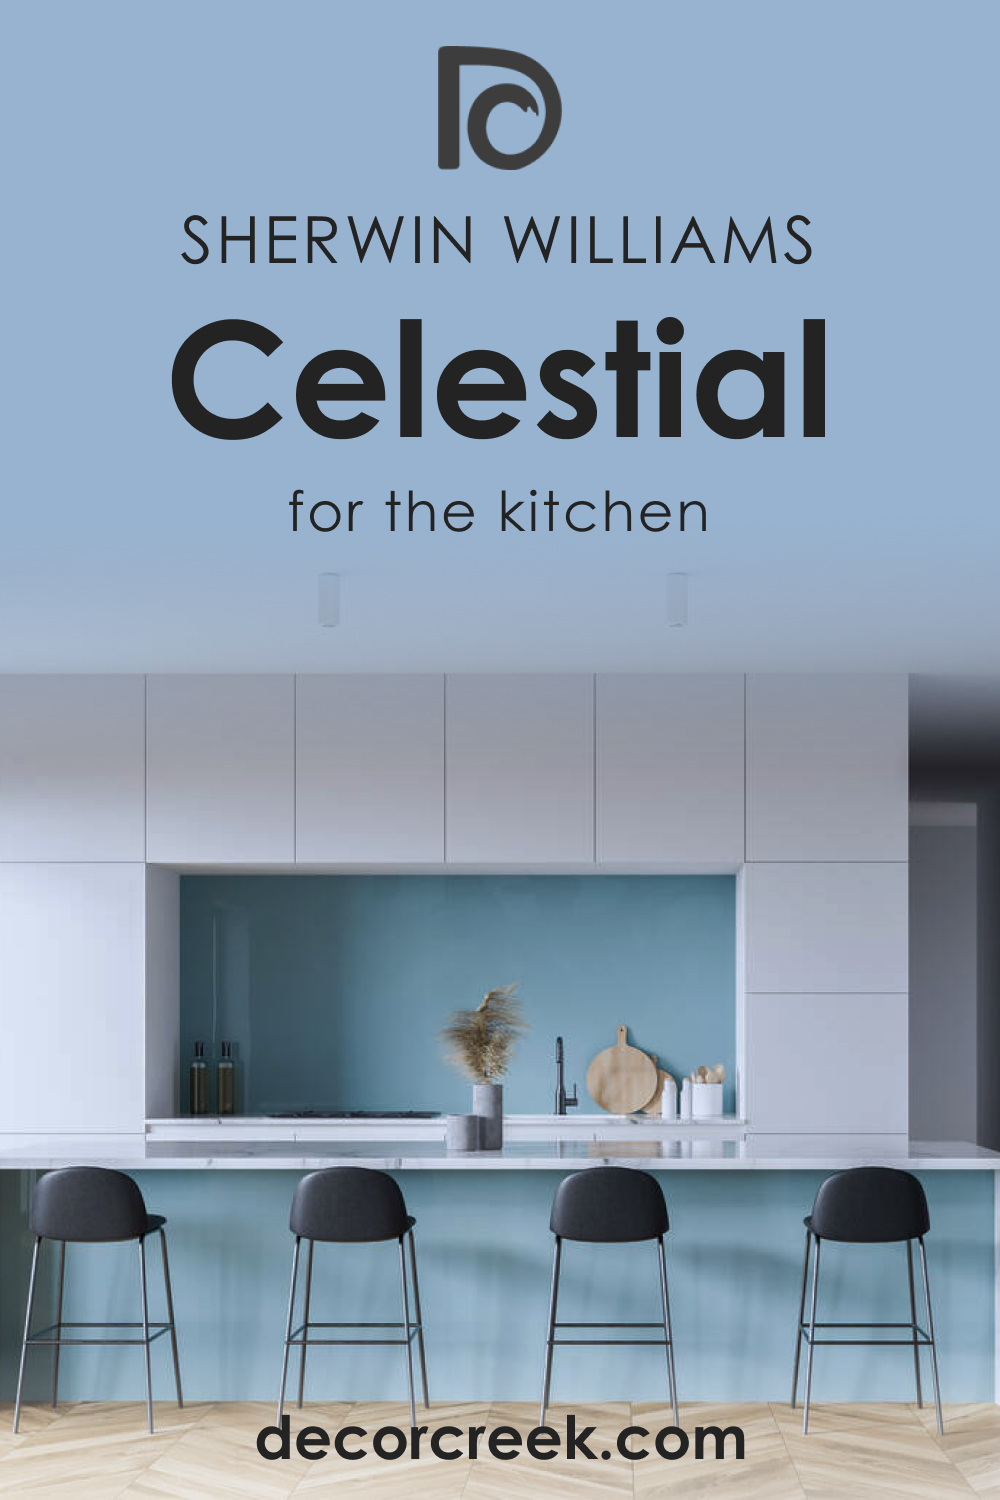 How to Use SW 6808 Celestial for the Kitchen?